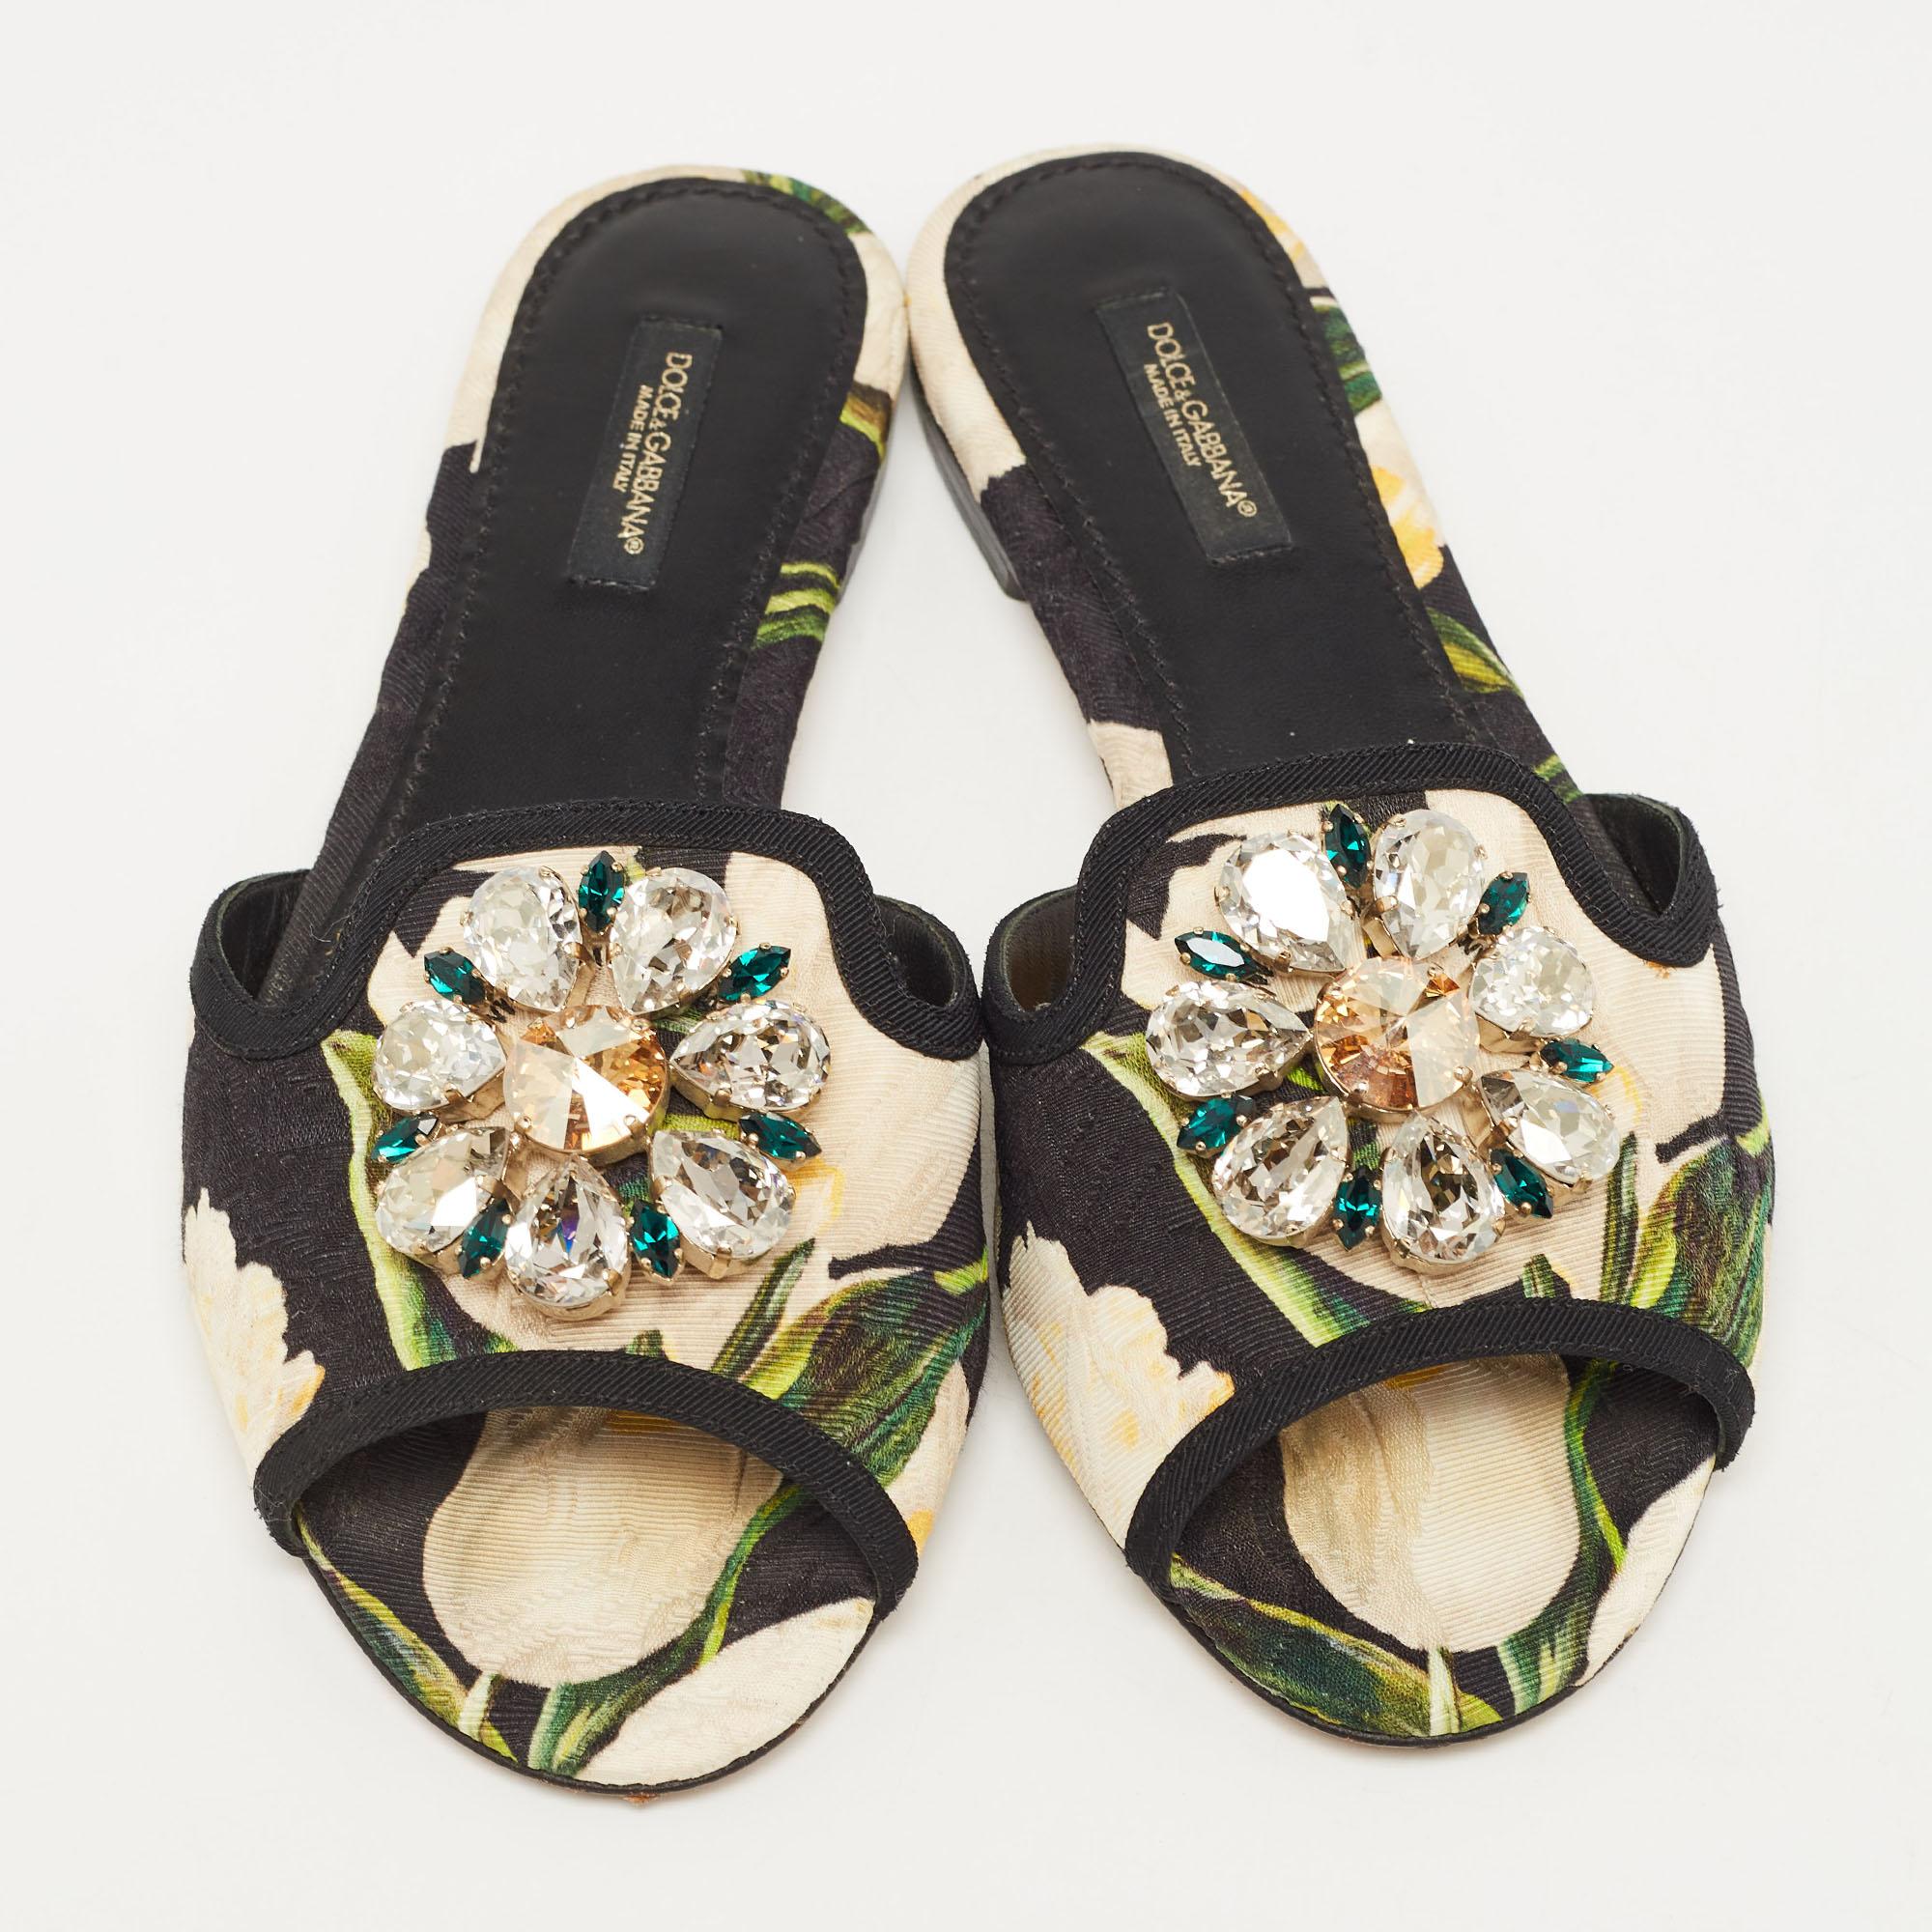 Present your feet with utmost comfort by choosing these flat slides from the house of Dolce & Gabbana. They are crafted from eye-catching printed canvas and detailed with a crystal-embellished bow on the uppers. They are complete with durable